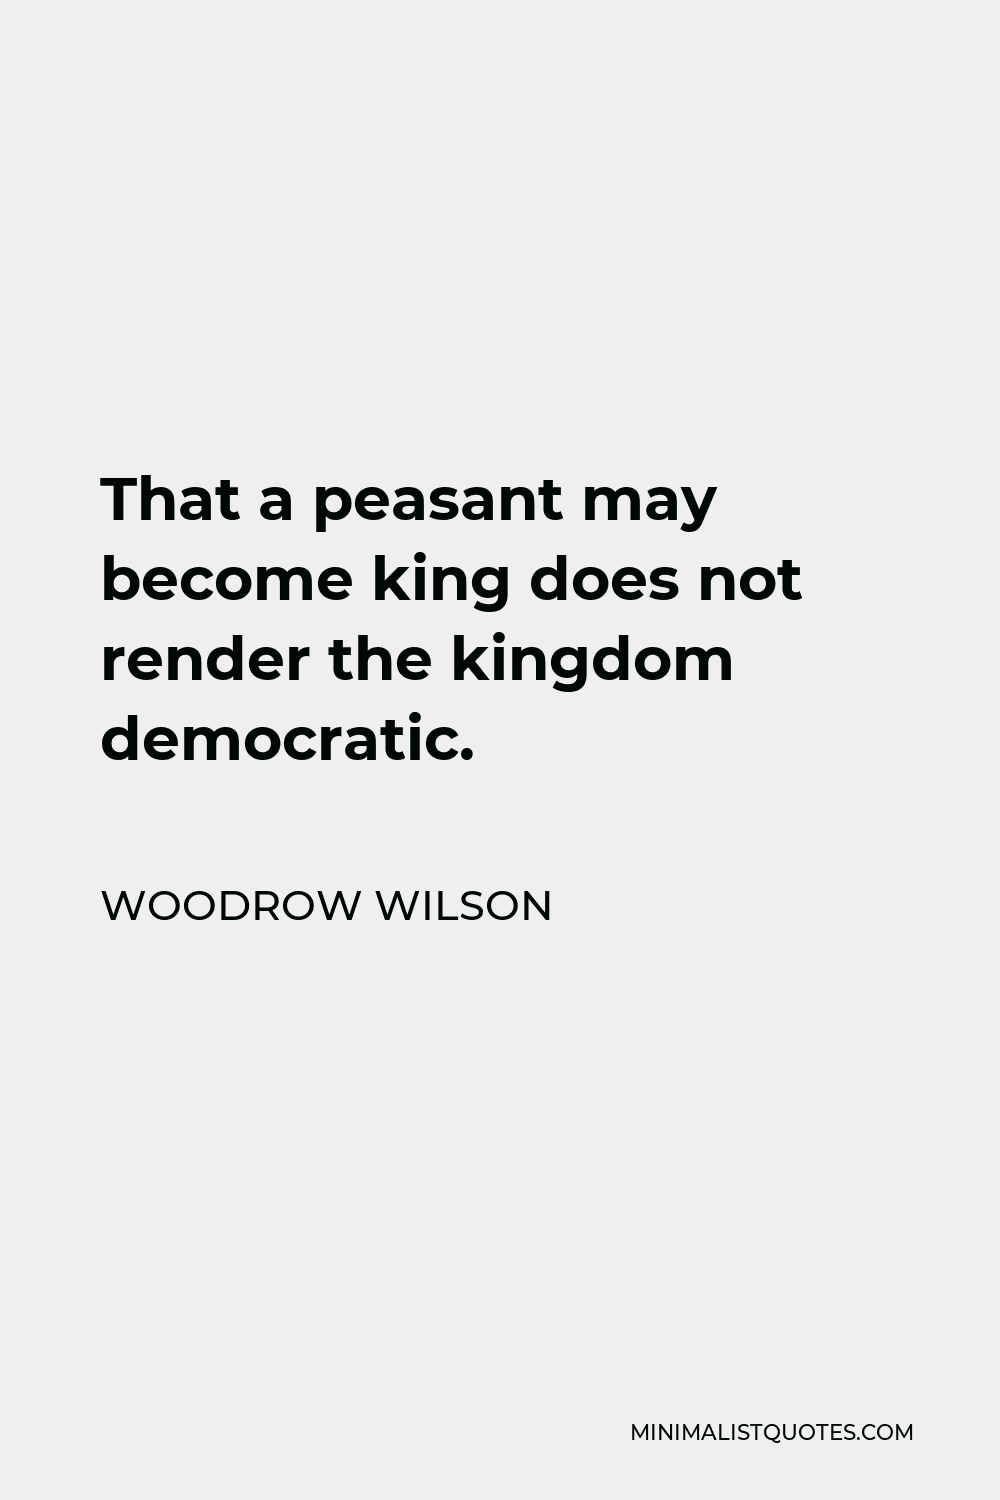 Woodrow Wilson Quote - That a peasant may become king does not render the kingdom democratic.